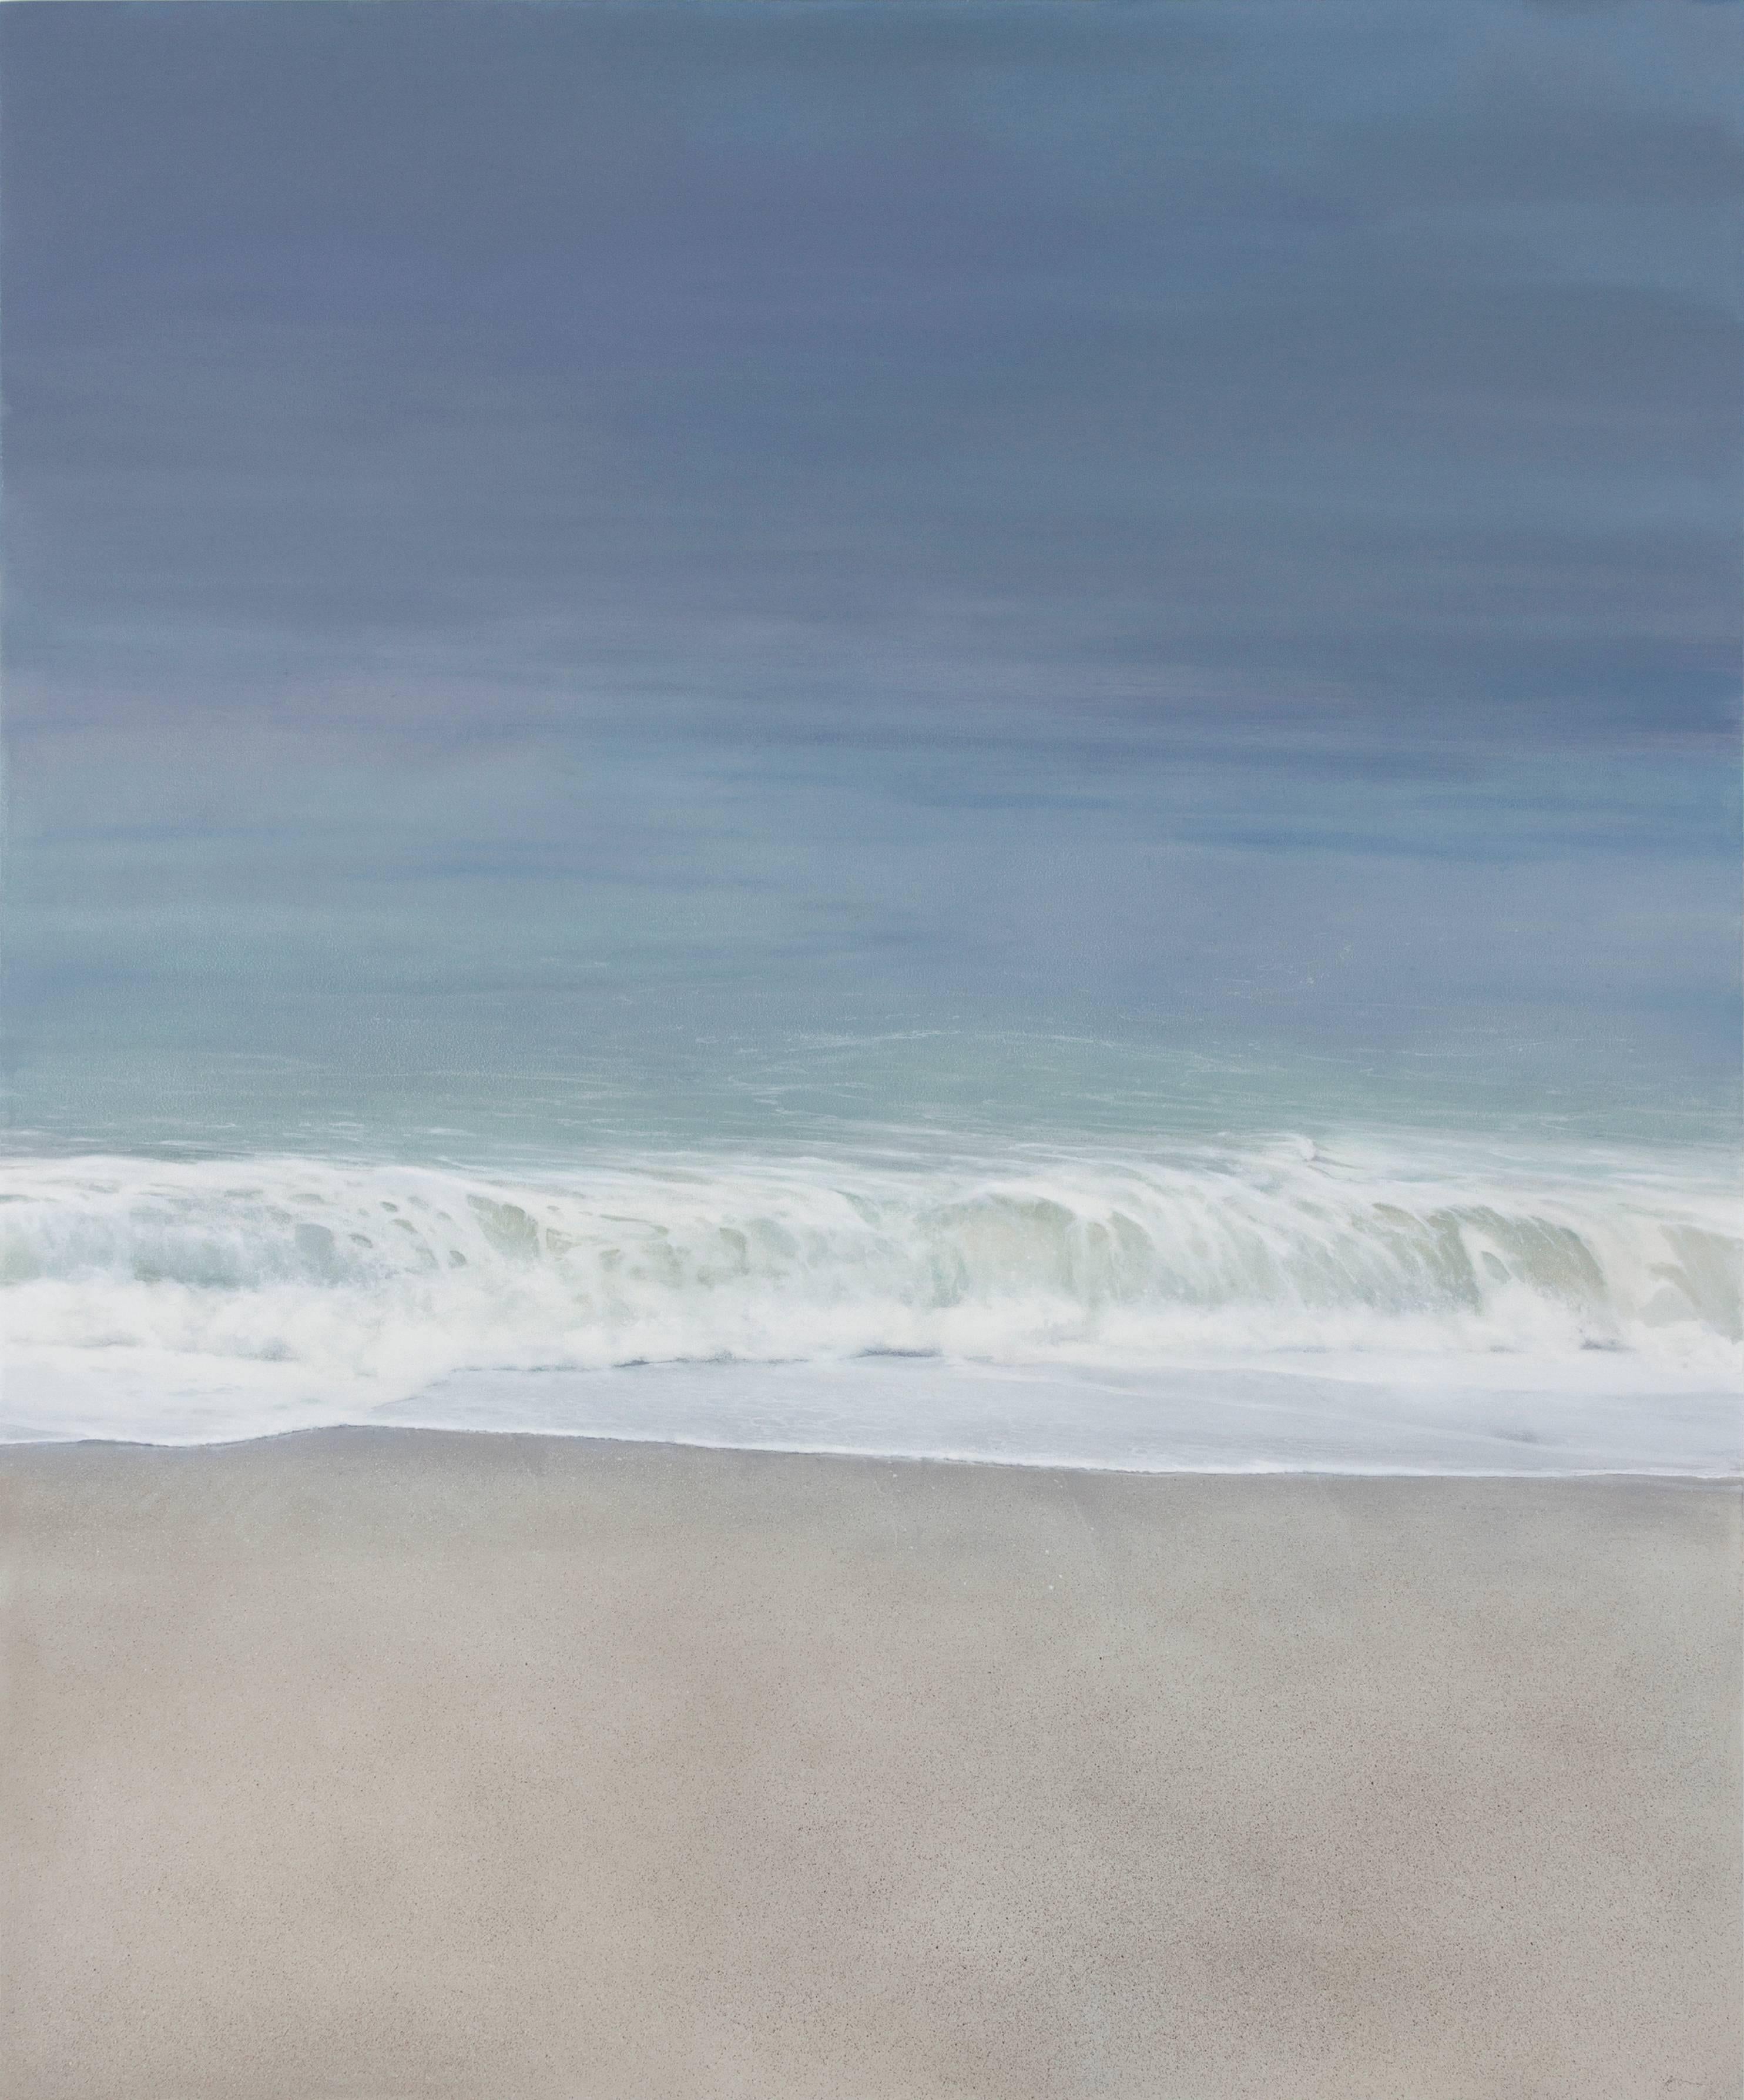 Todd Kenyon Landscape Painting - AMBIENT SURF, waves, beach, coastline, sand, muted colors, photo-realism